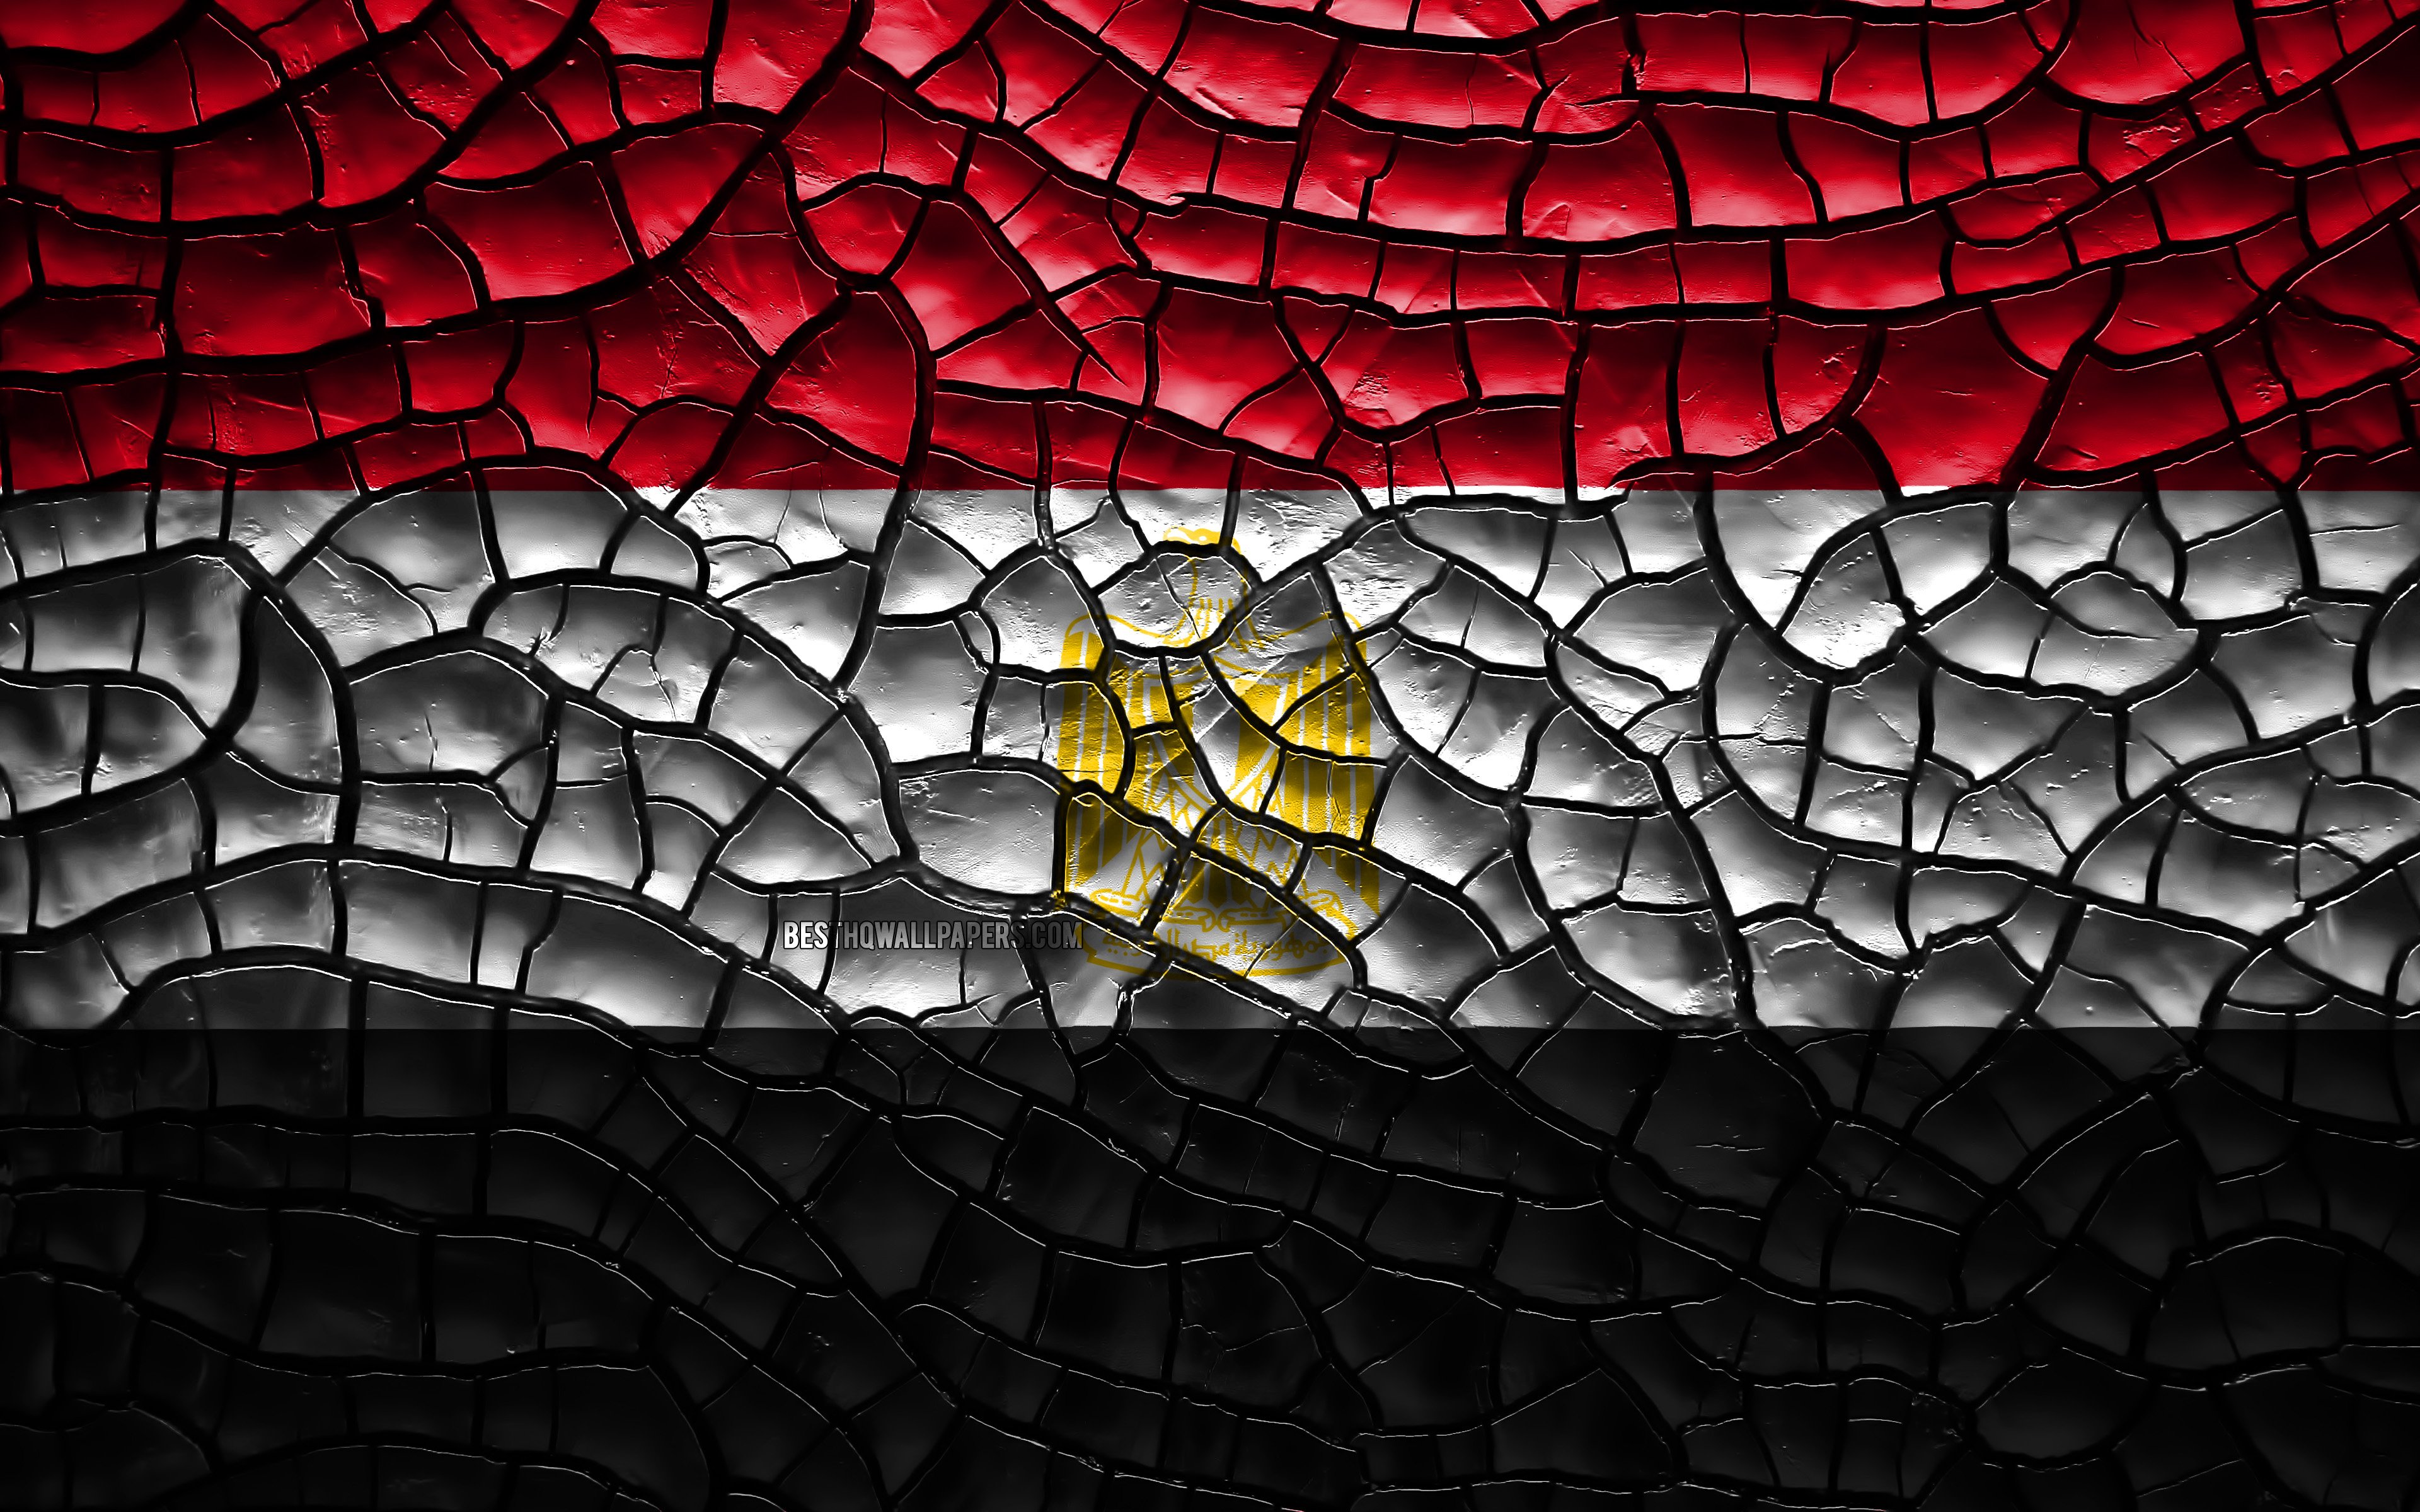 Download wallpapers Flag of Egypt, 4k, cracked soil, Africa, Egyptian flag,  3D art, Egypt, African countries, national symbols, Egypt 3D flag for  desktop with resolution 3840x2400. High Quality HD pictures wallpapers